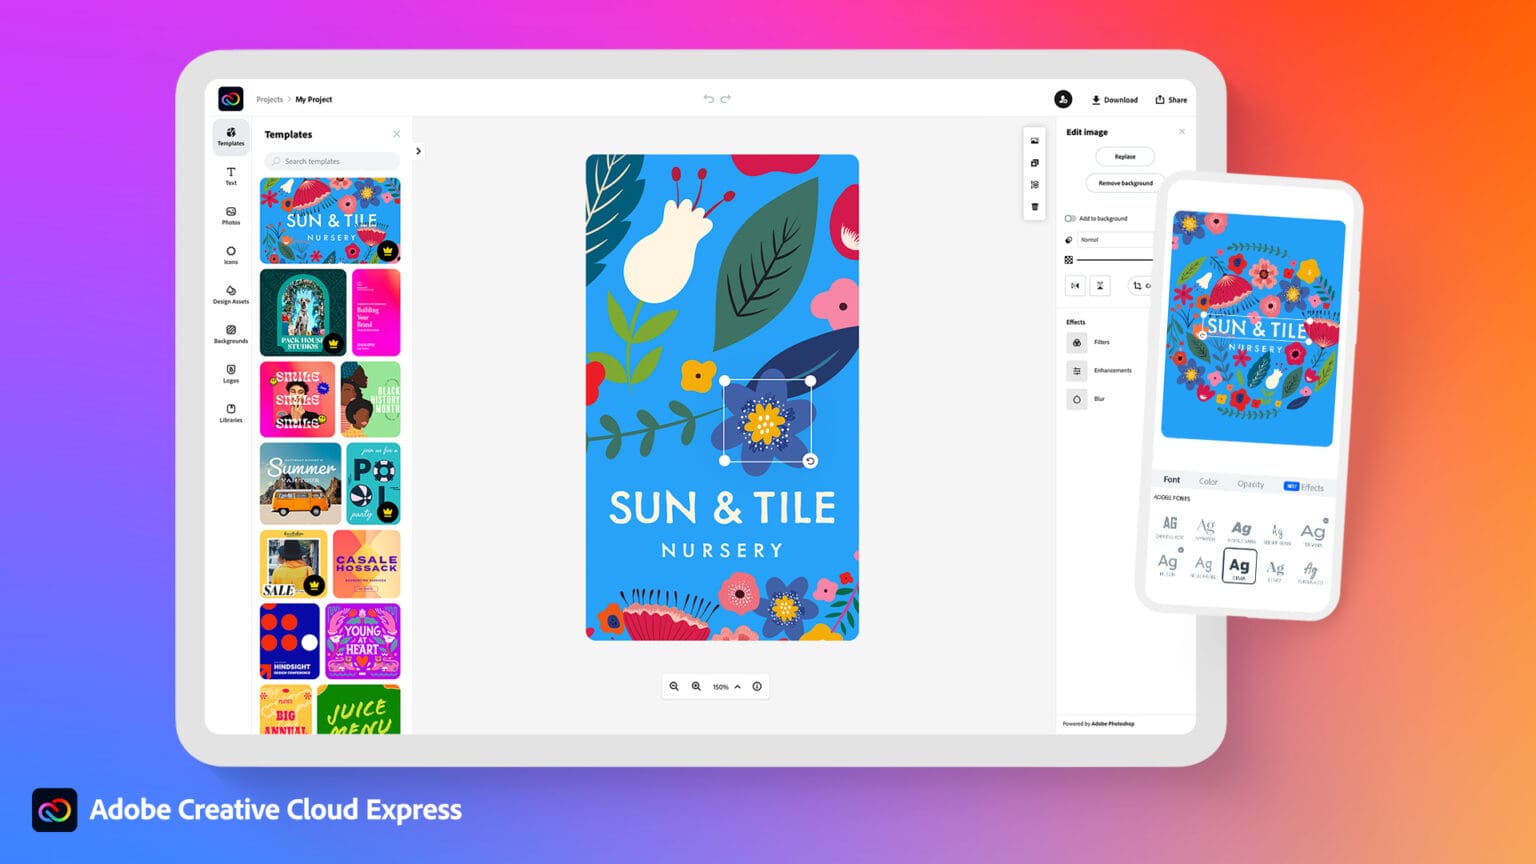 Adobe's new Creative Cloud Express app aims to make content creation easier for all.